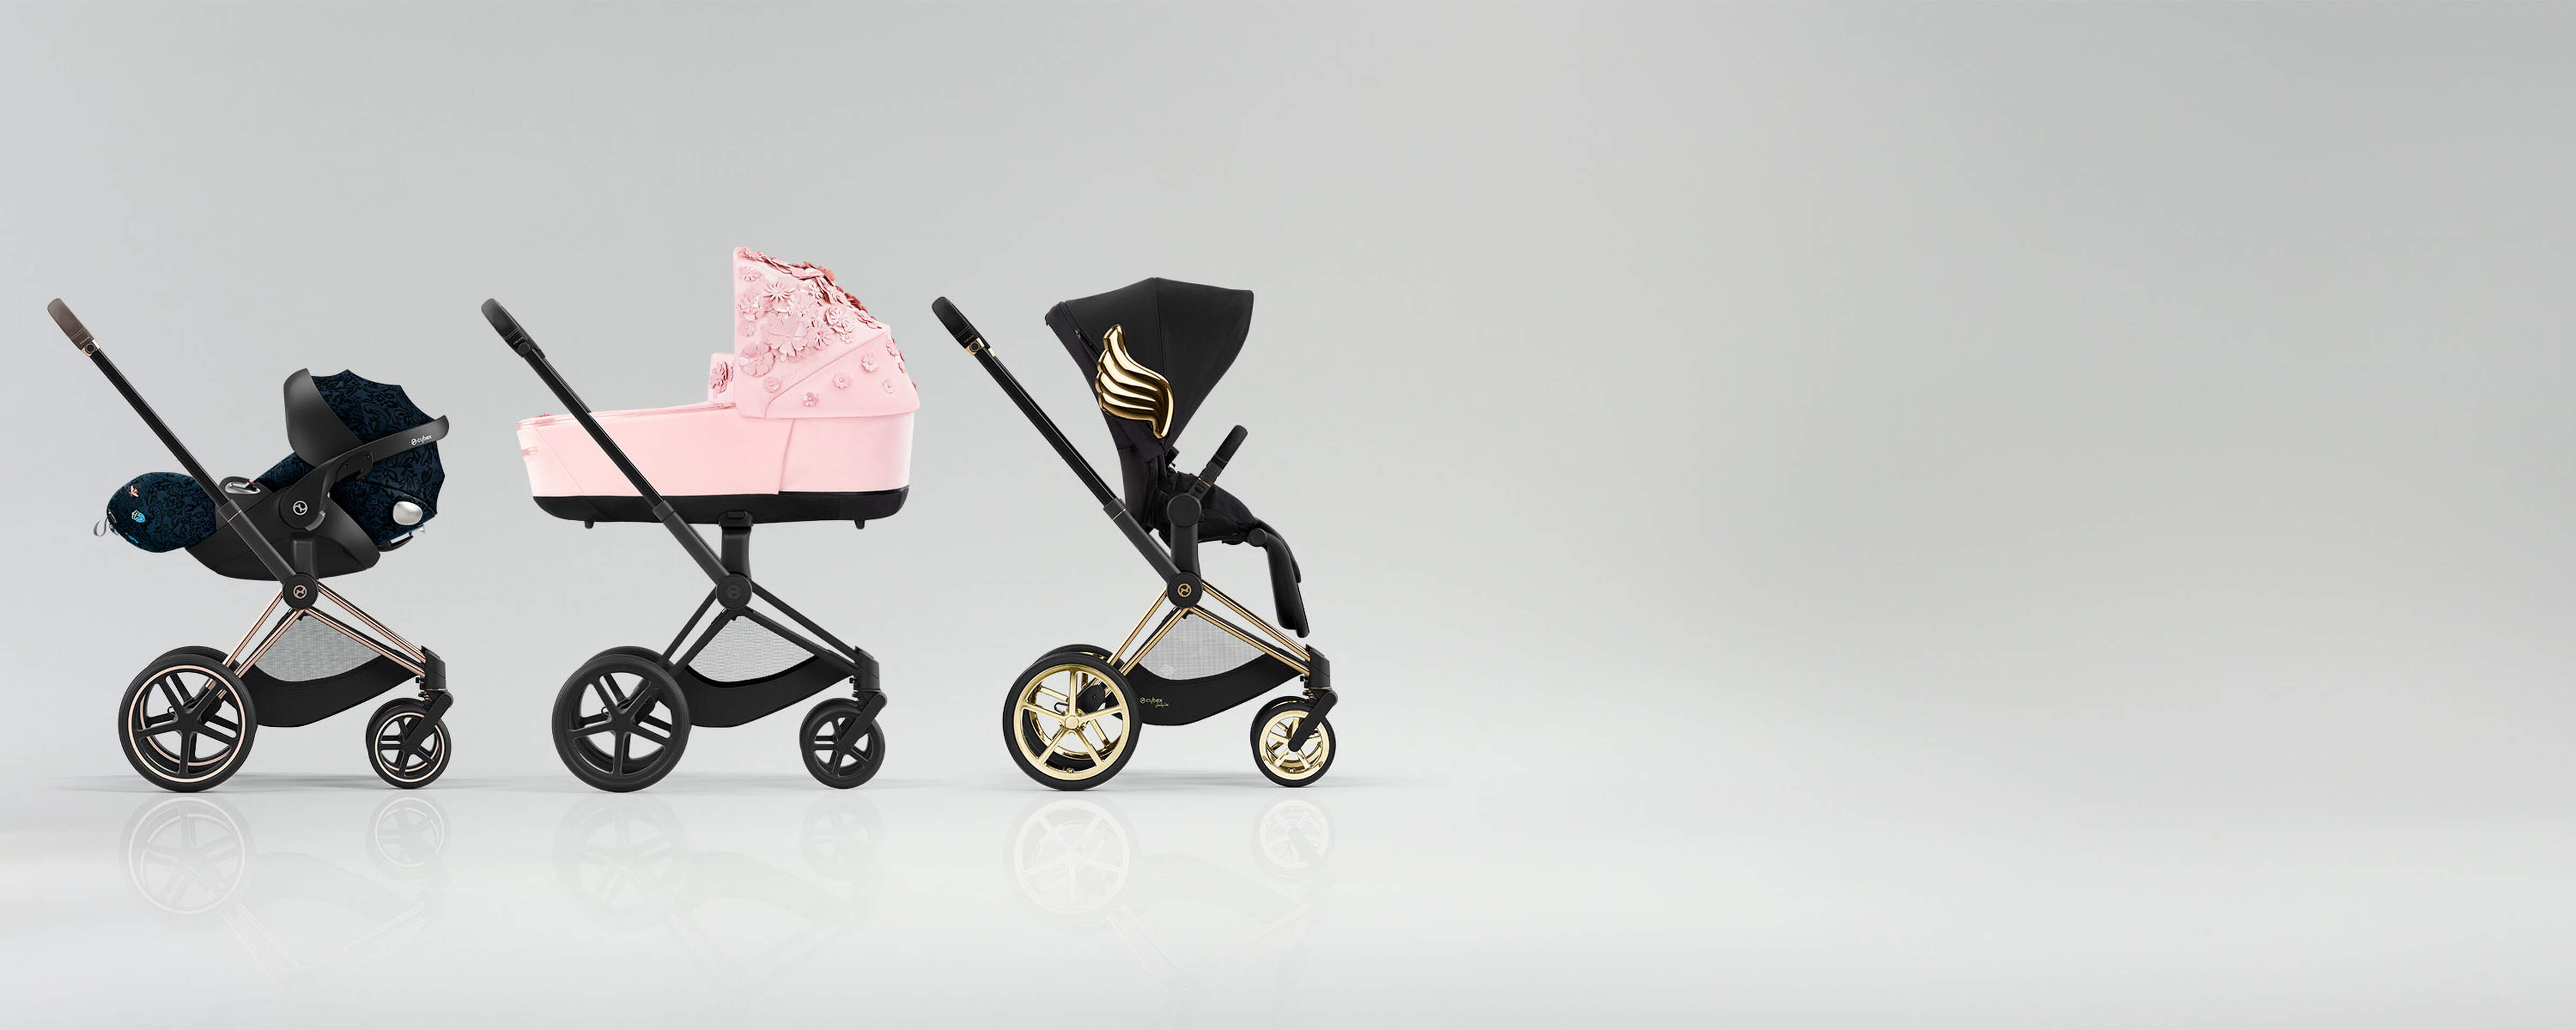 CYBEX Platinum Stroller Priam Lux Carry Cot shown on Priam Frame Banner